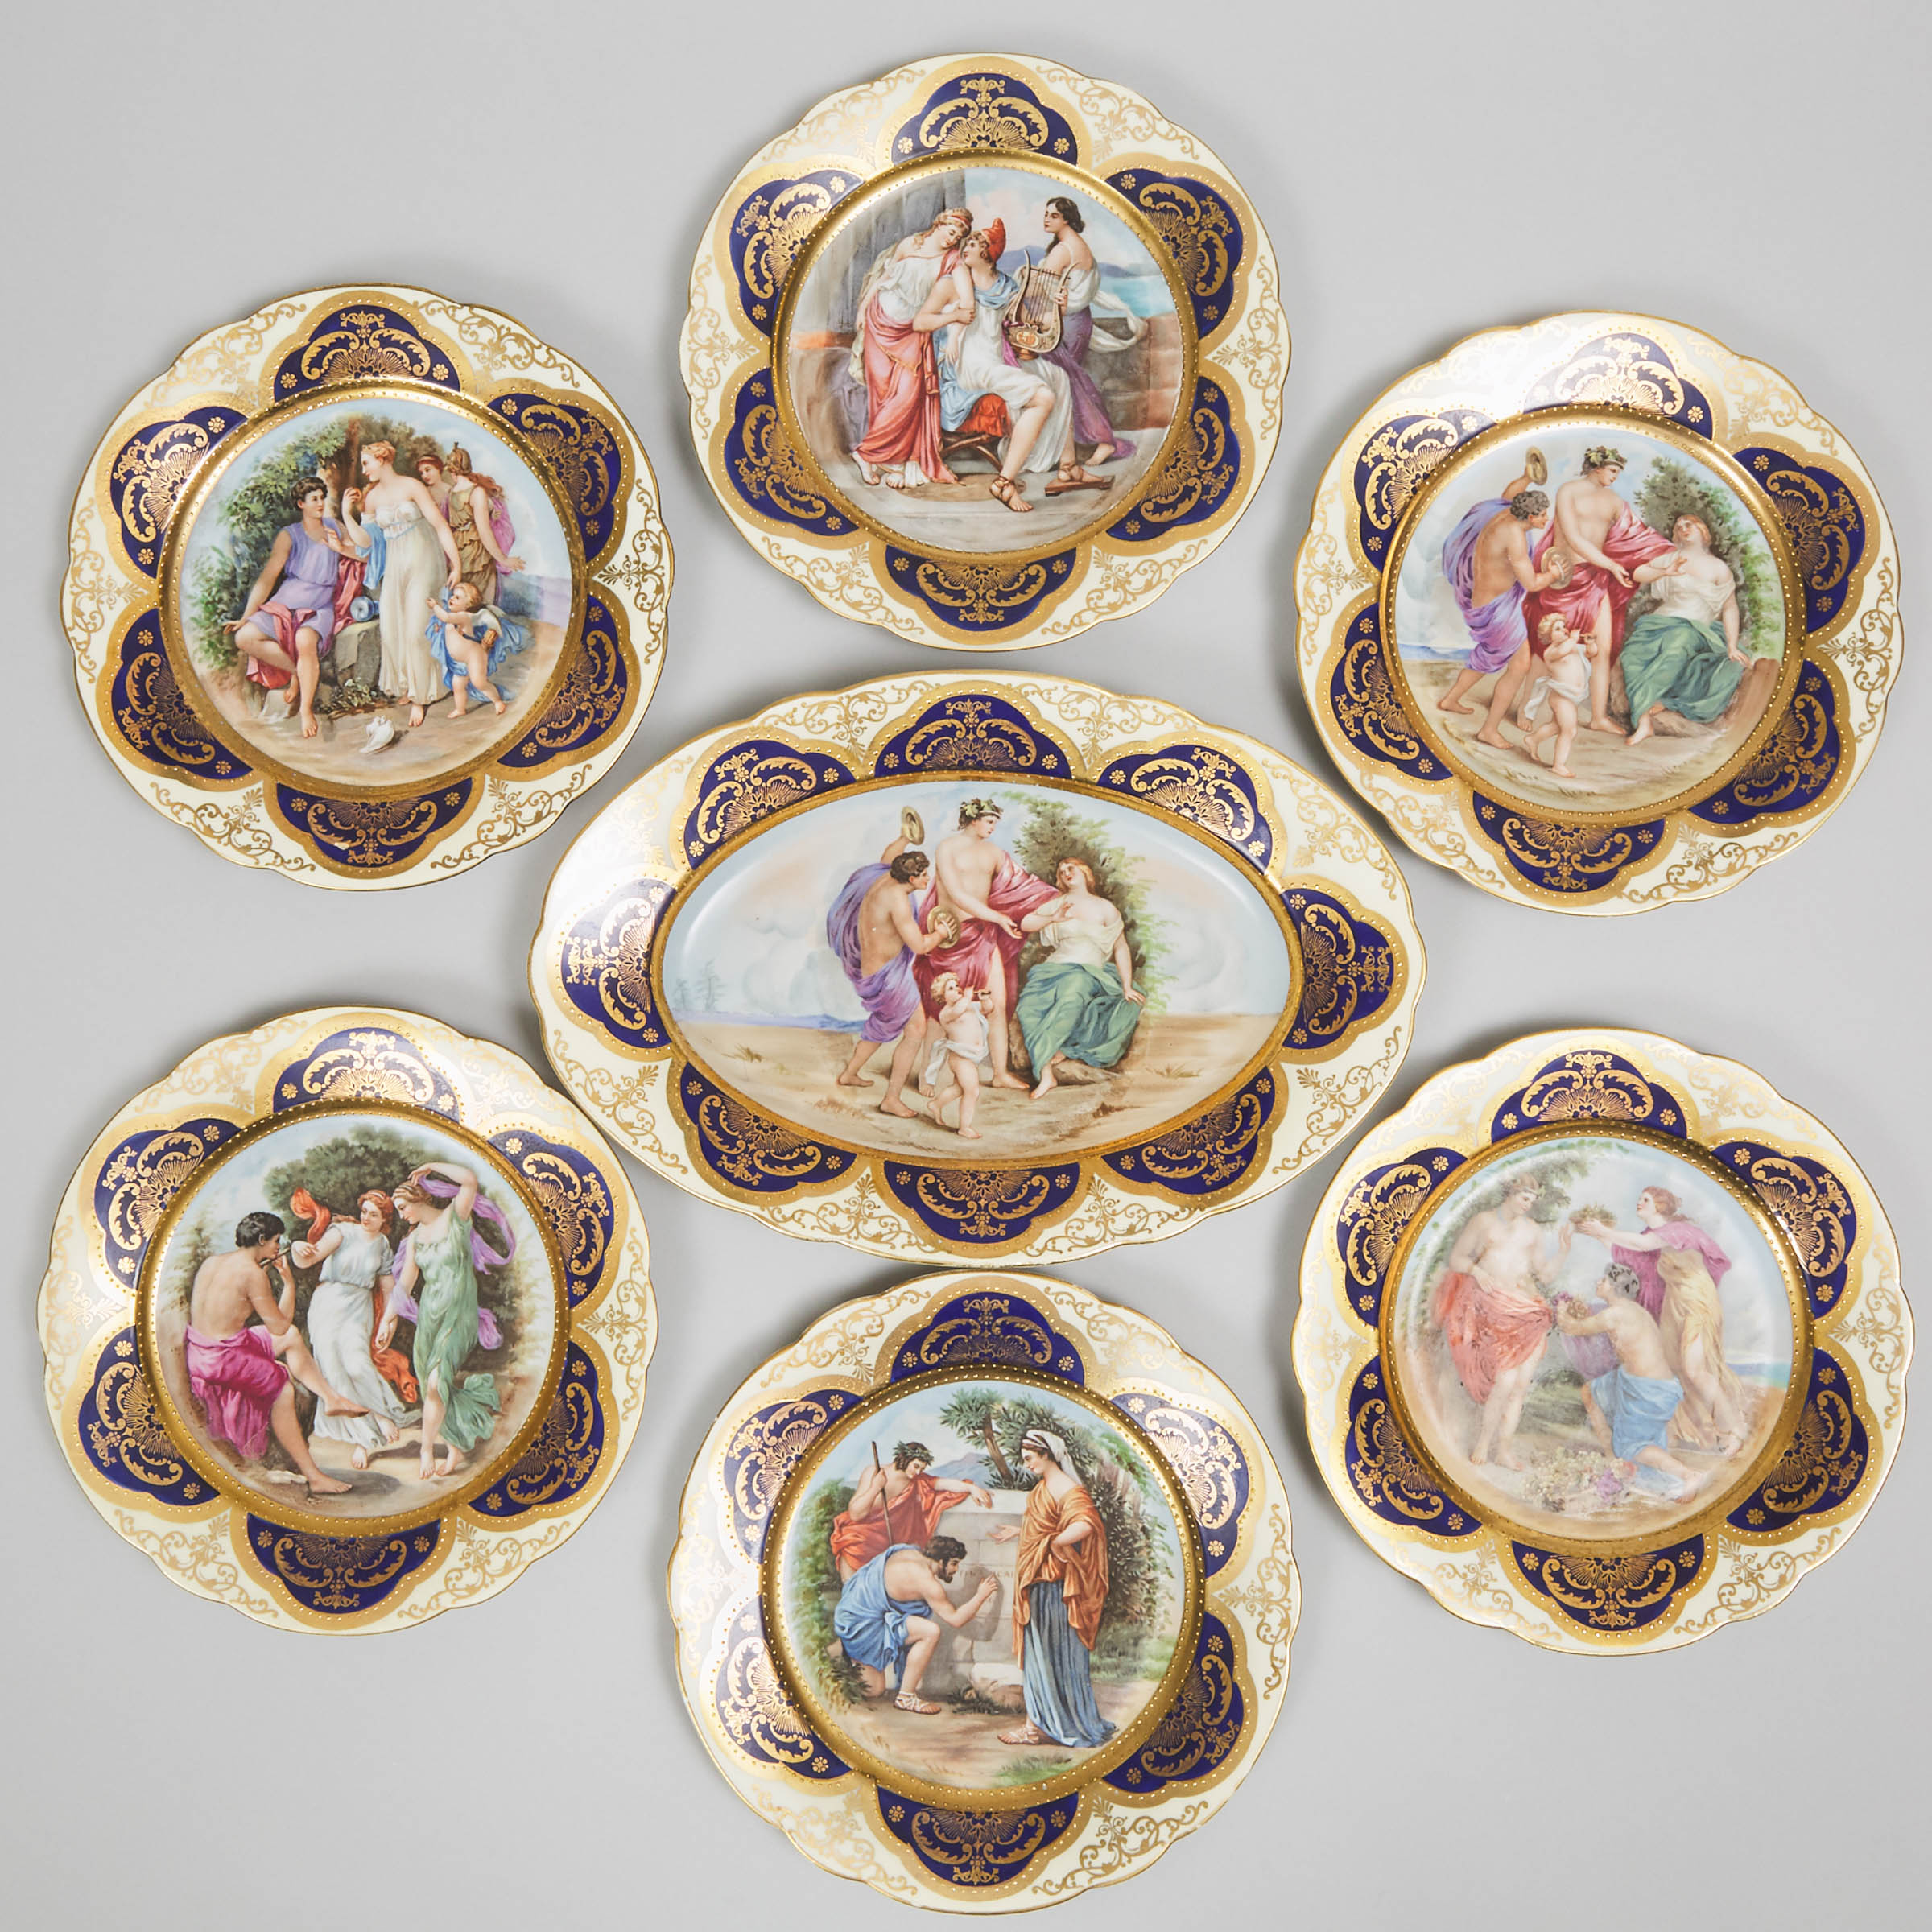 Six Pauly & Co., Venezia Vienna-Style Plates and an Oval Platter, early 20th century